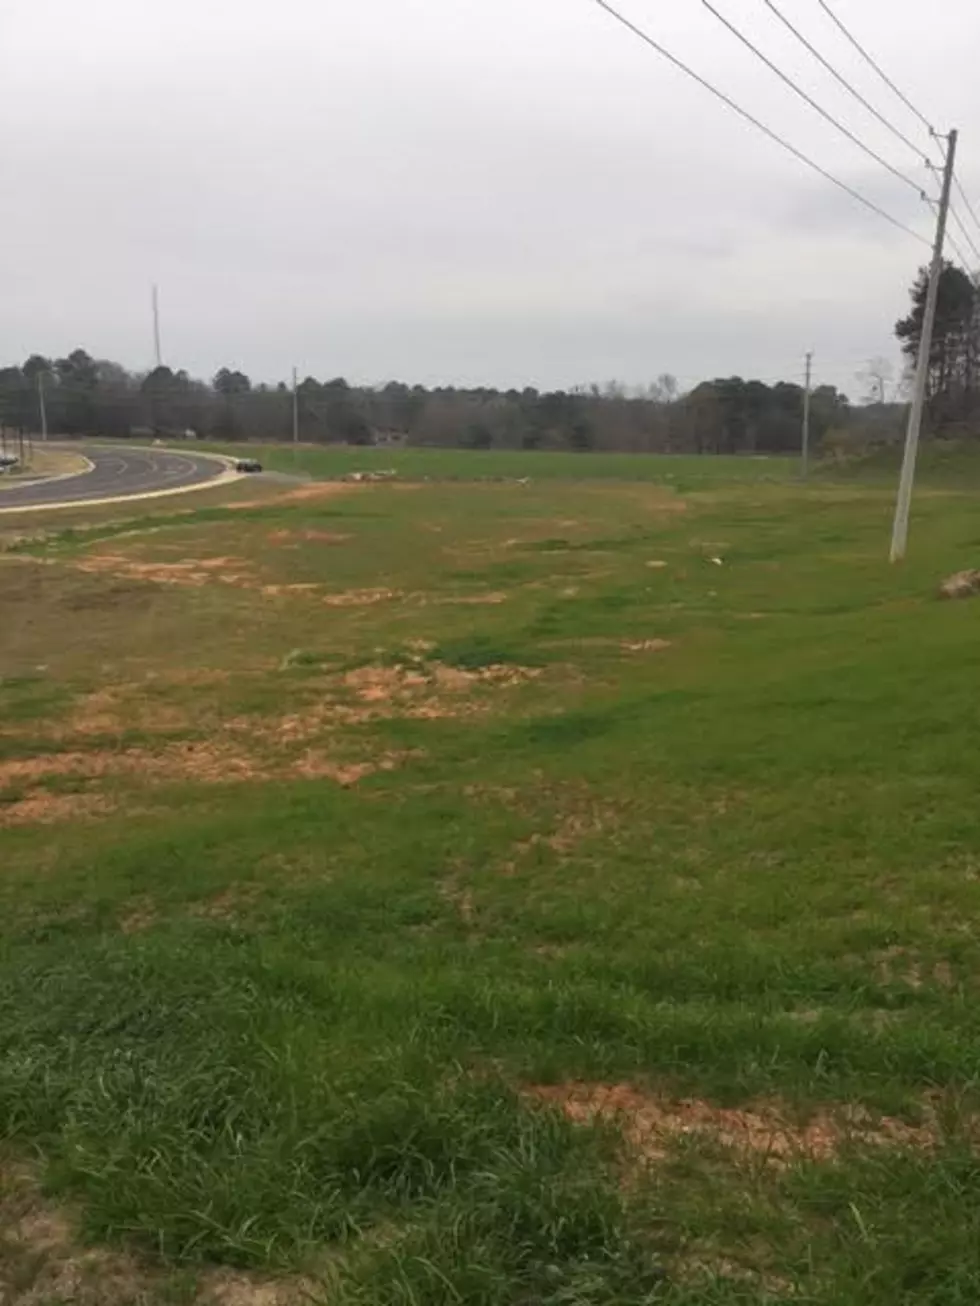 What Should Tuscaloosa Build On This Vacant Lot?